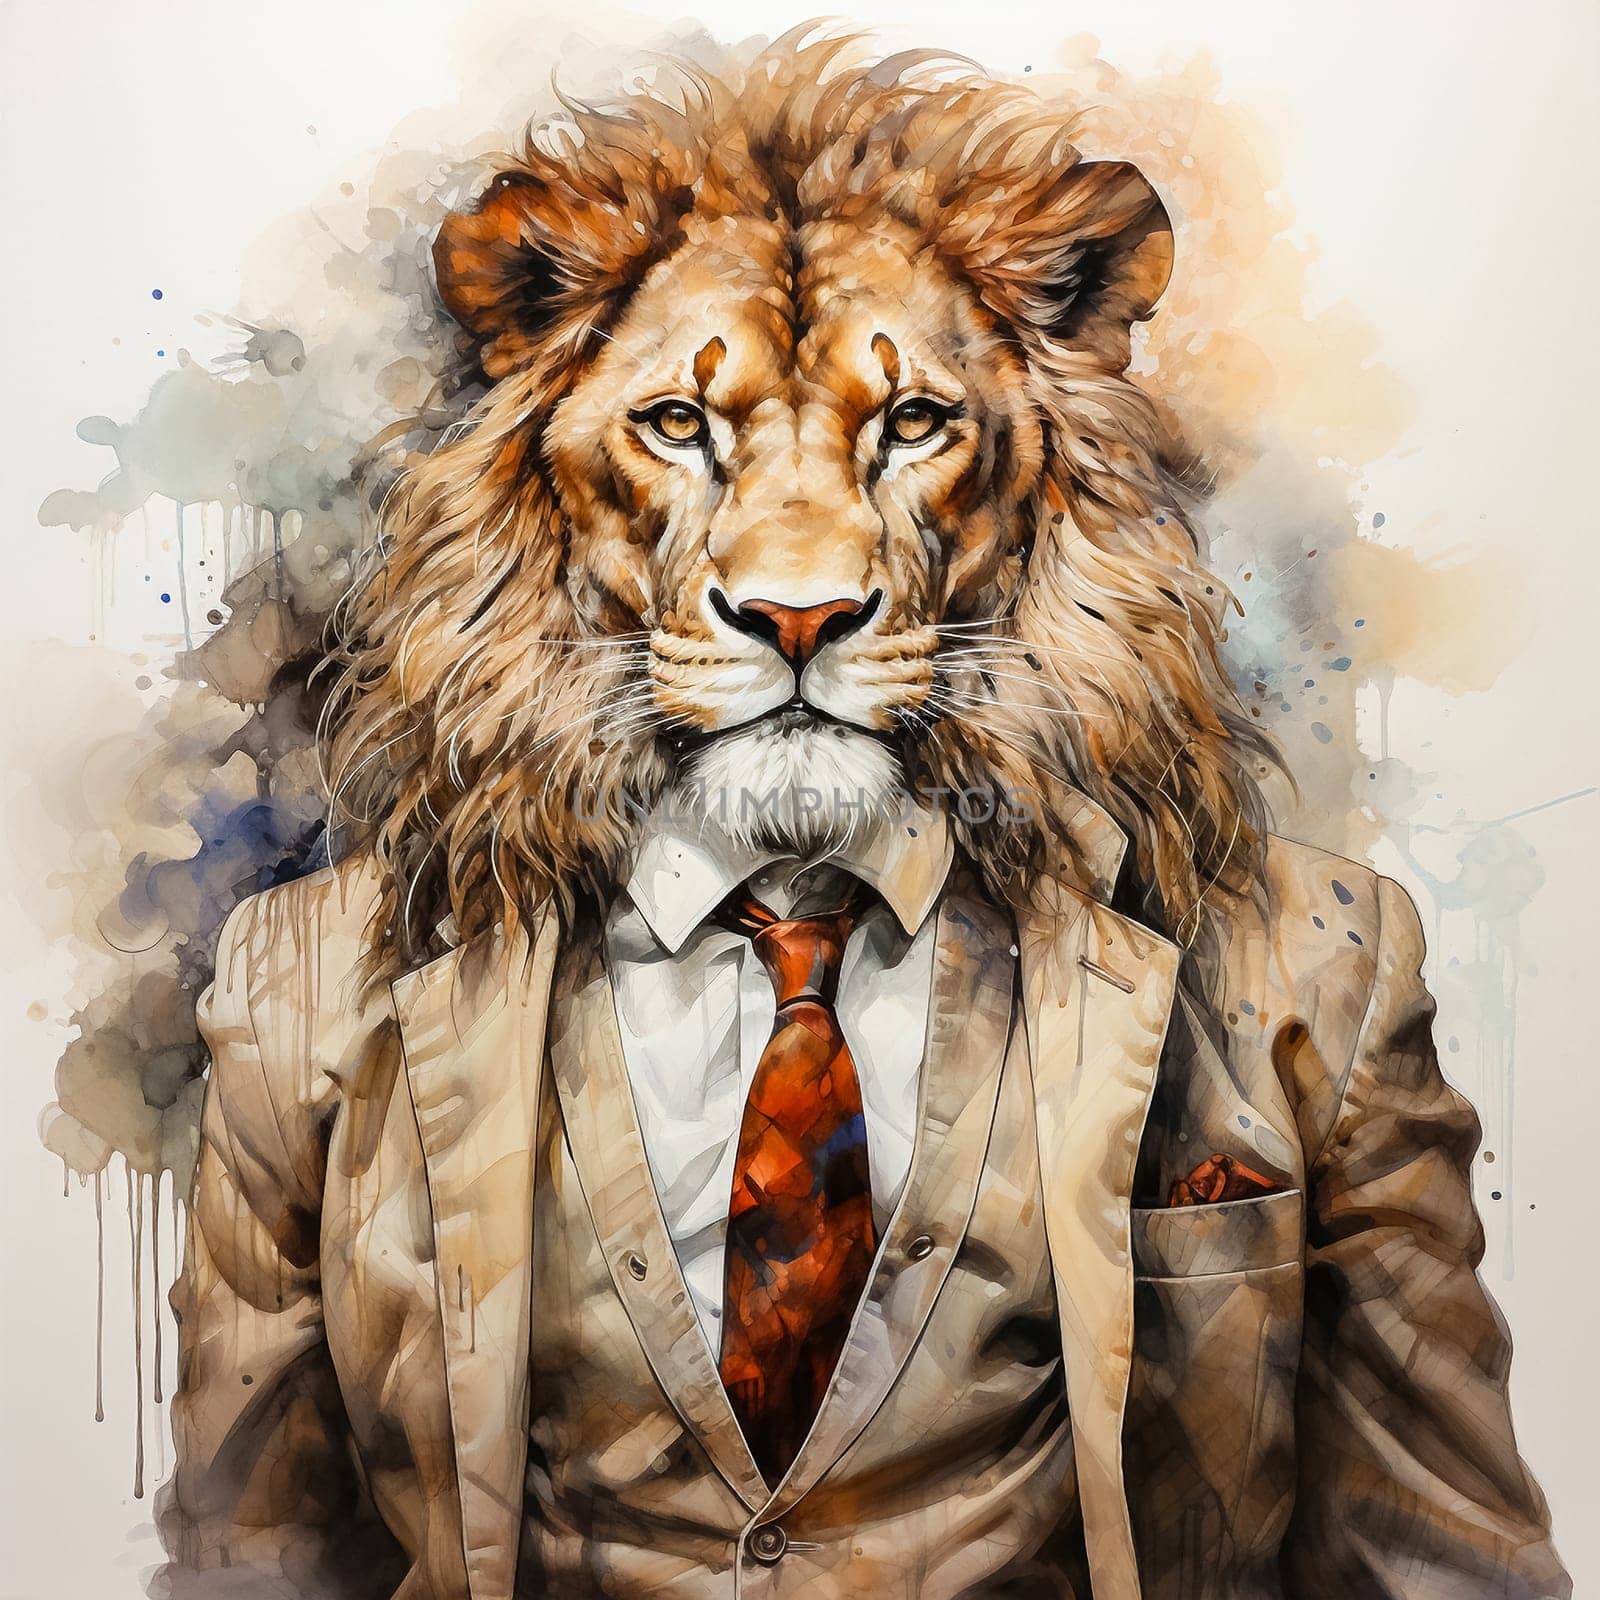 A business watercolor lion in an elegant suit is a whimsical combination of the business world and natural charm, depicted with artistic flair.